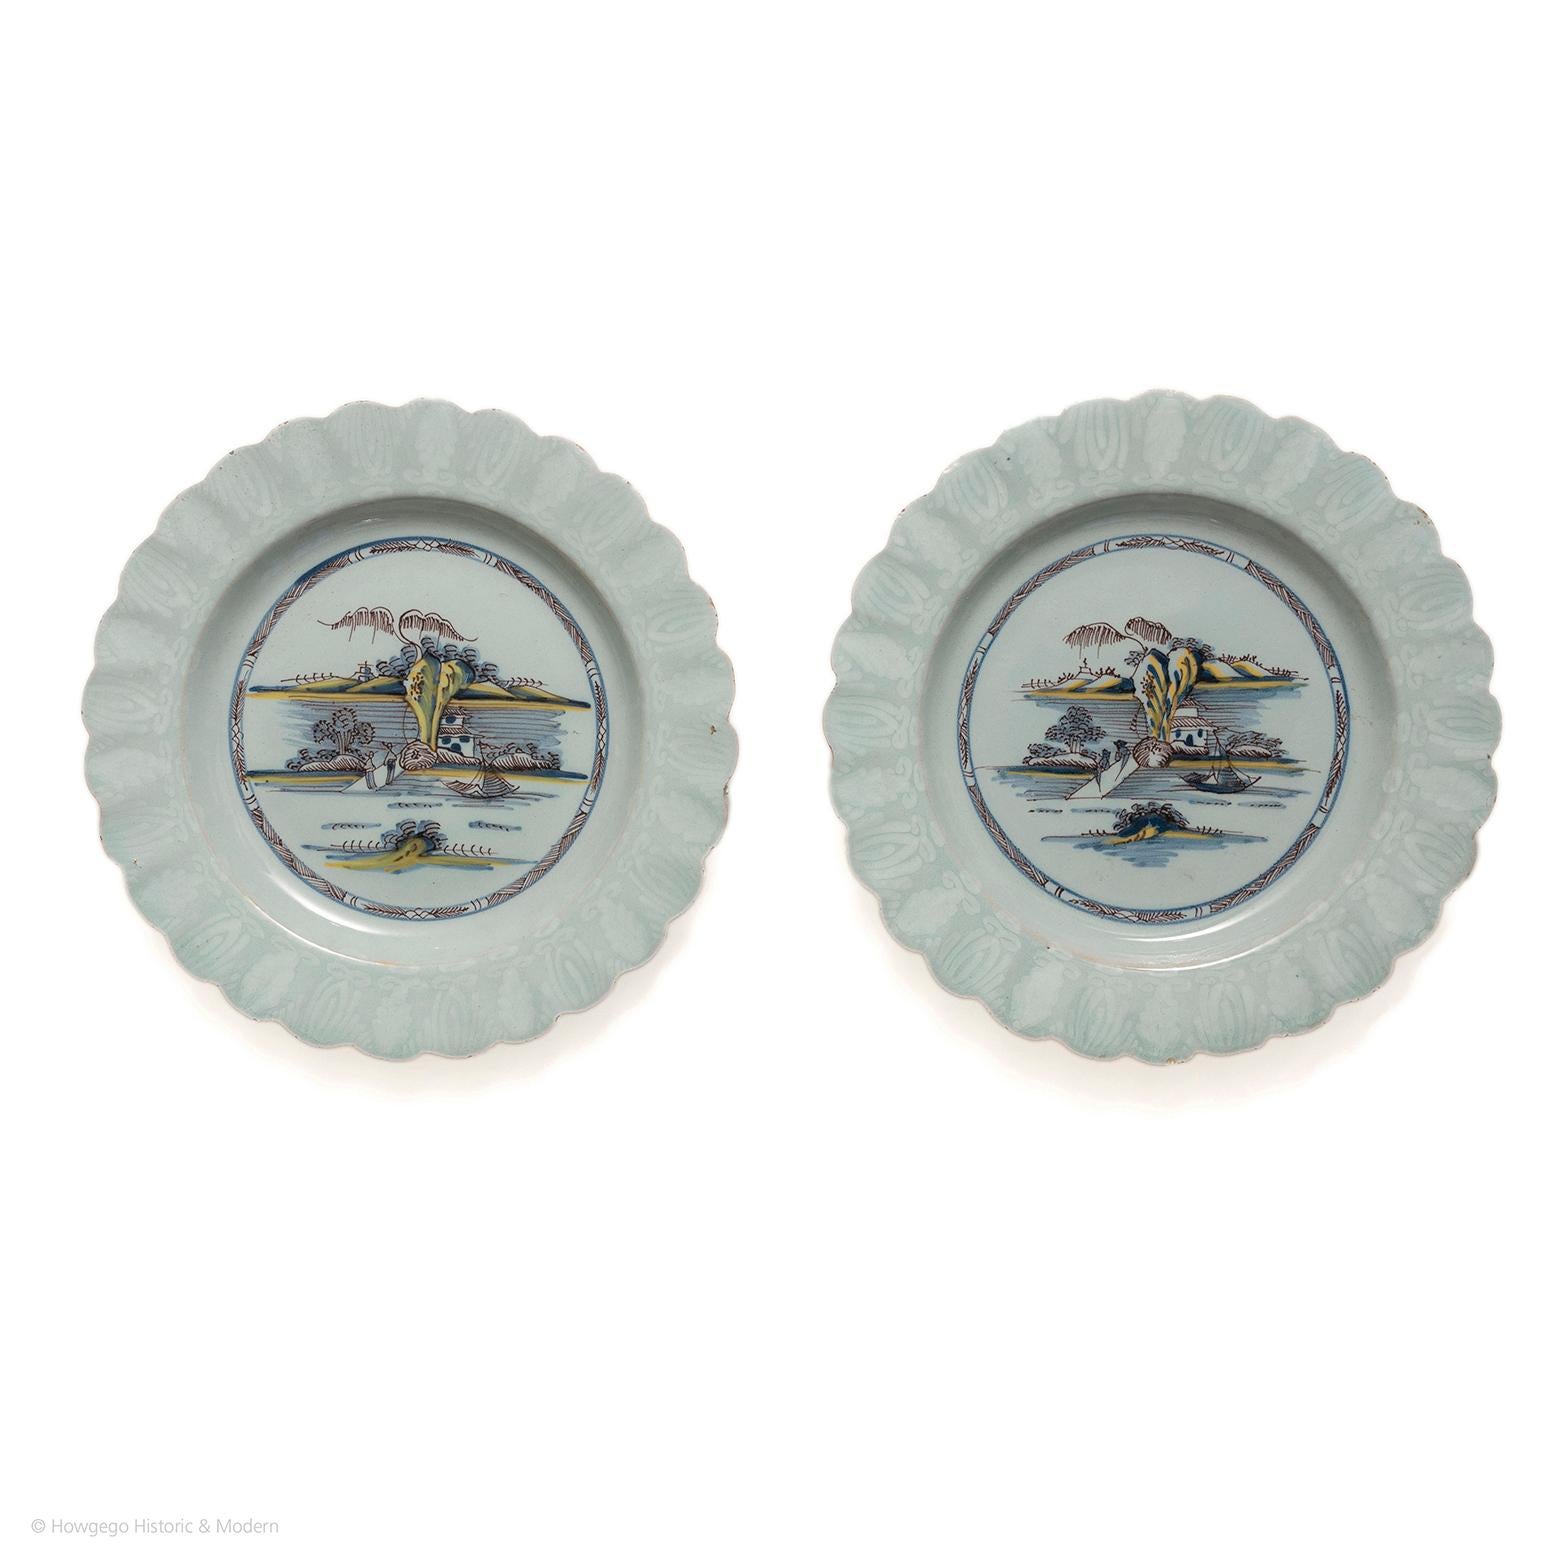 Charming pair of plates with rare and desirable features of delftware; fluting, bianco-sopra-bianco border and in polychrome including manganese
From a Bristol collection and originally made in Bristol
 
Pair of 18th century bianco-sopra-bianco